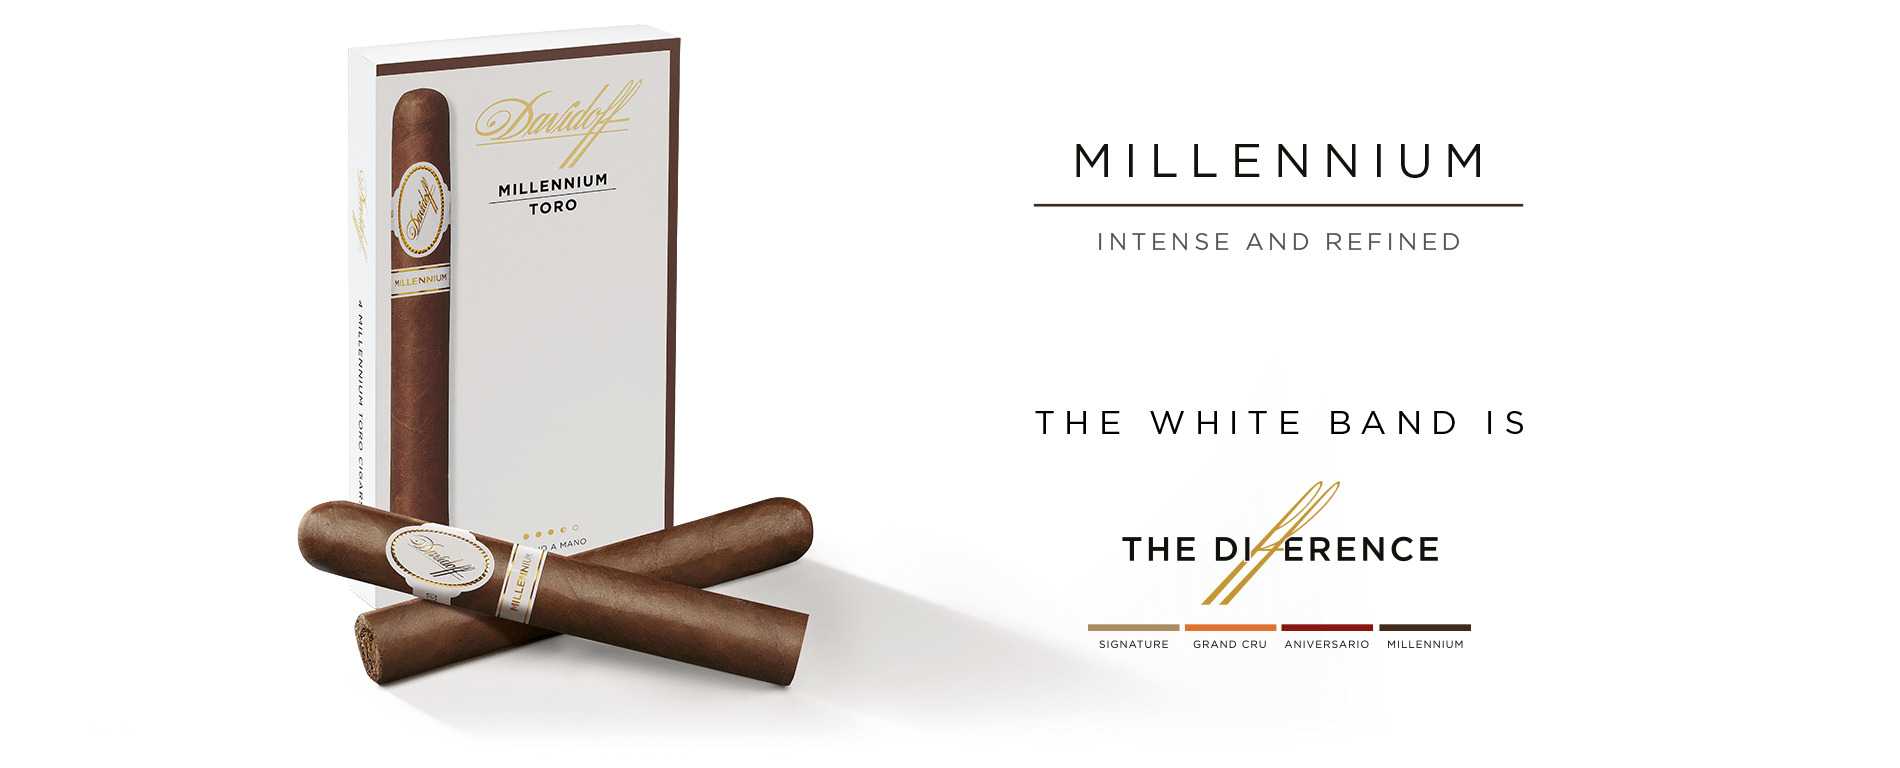 A box of Davidoff Millennium Toro with two cigars placed crosswise in front of it.